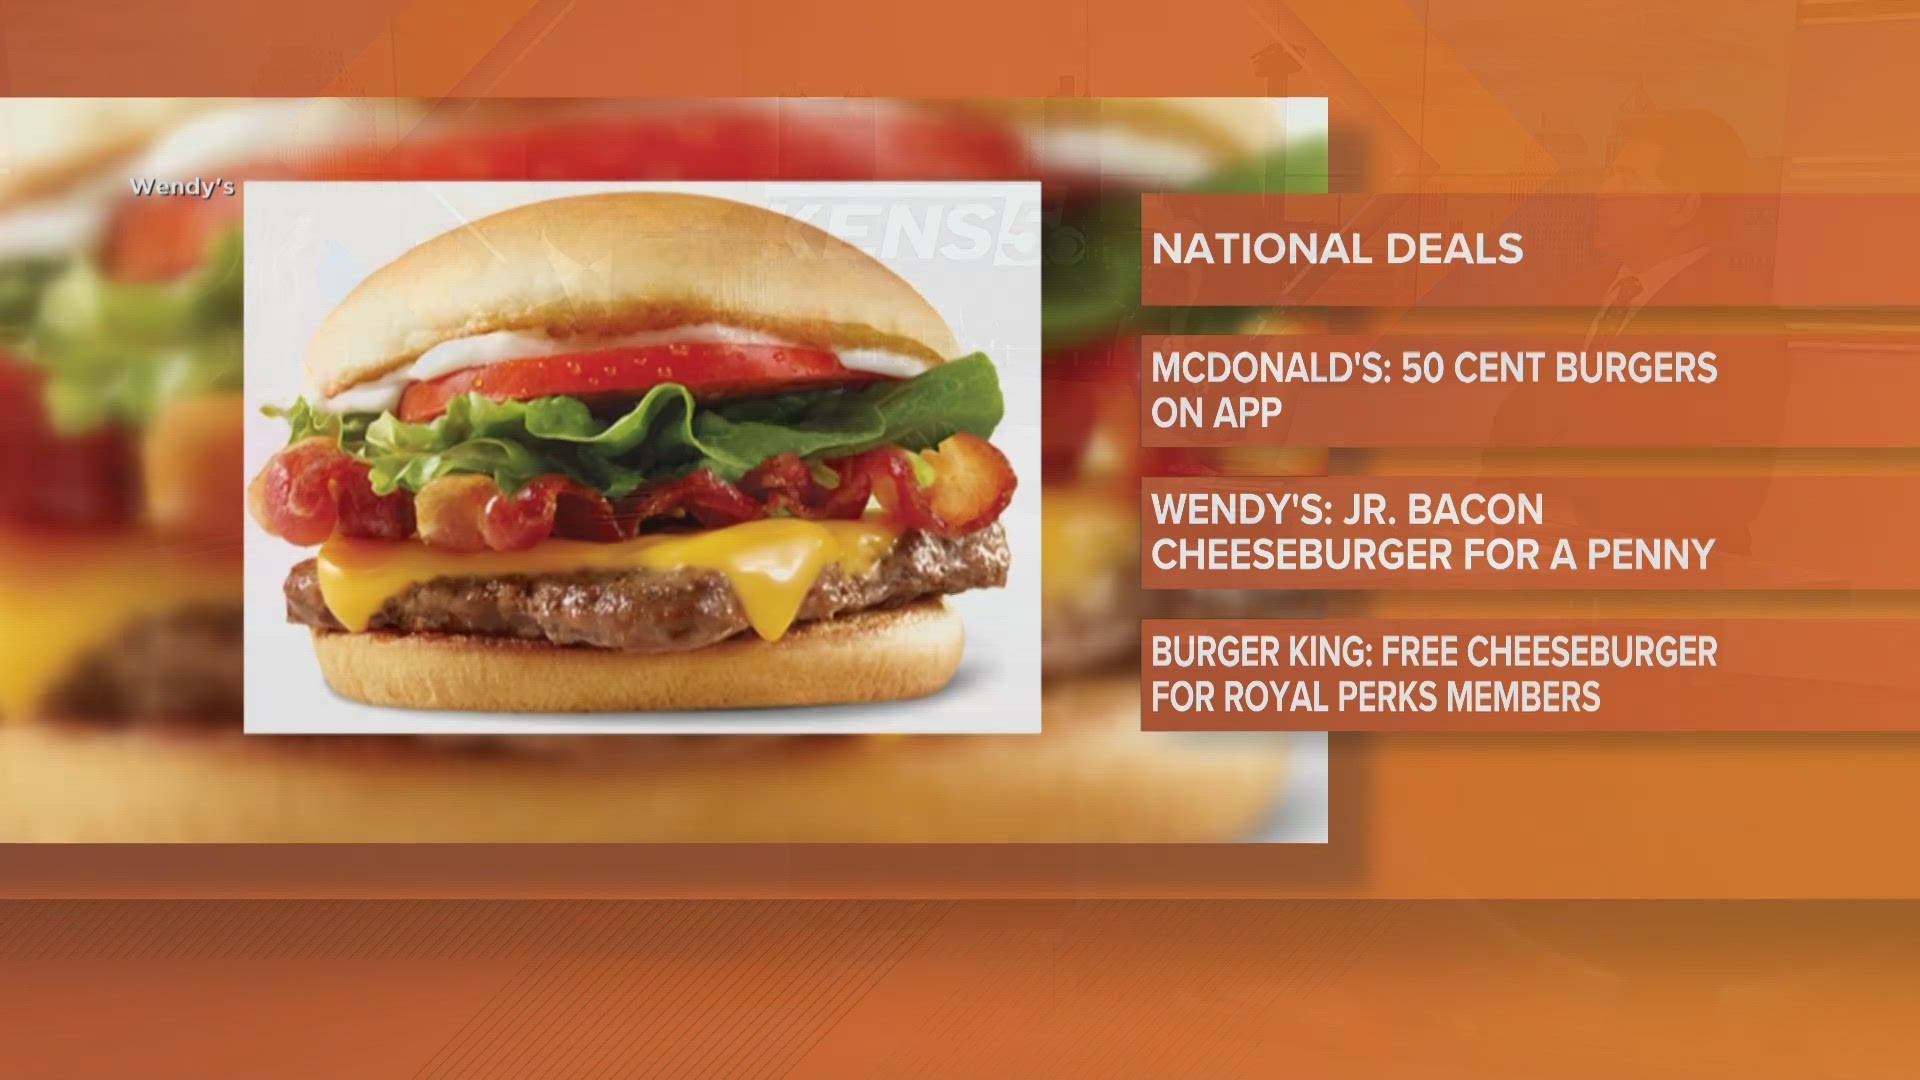 Want a burger for 50 cents? Here's how to cash in on National Cheeseburger Day.